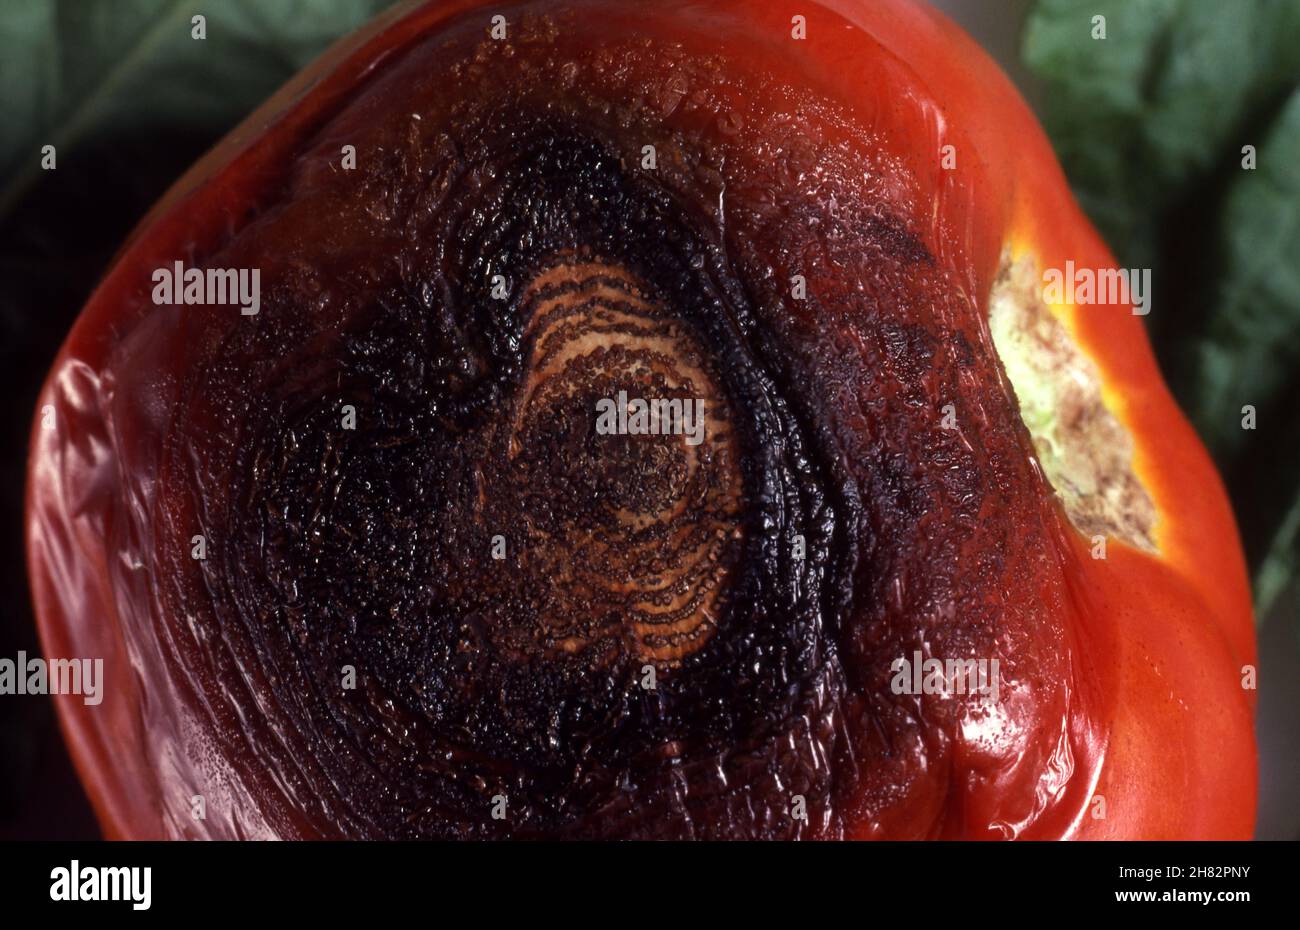 ANTHRACNOSE (COLLETOTRICHUM GLOEOSPORIOIDES) ON A TOMATO. LATER DEVELOPMENT OF SAUCER-SHAPED DEPRESSIONS. Stock Photo